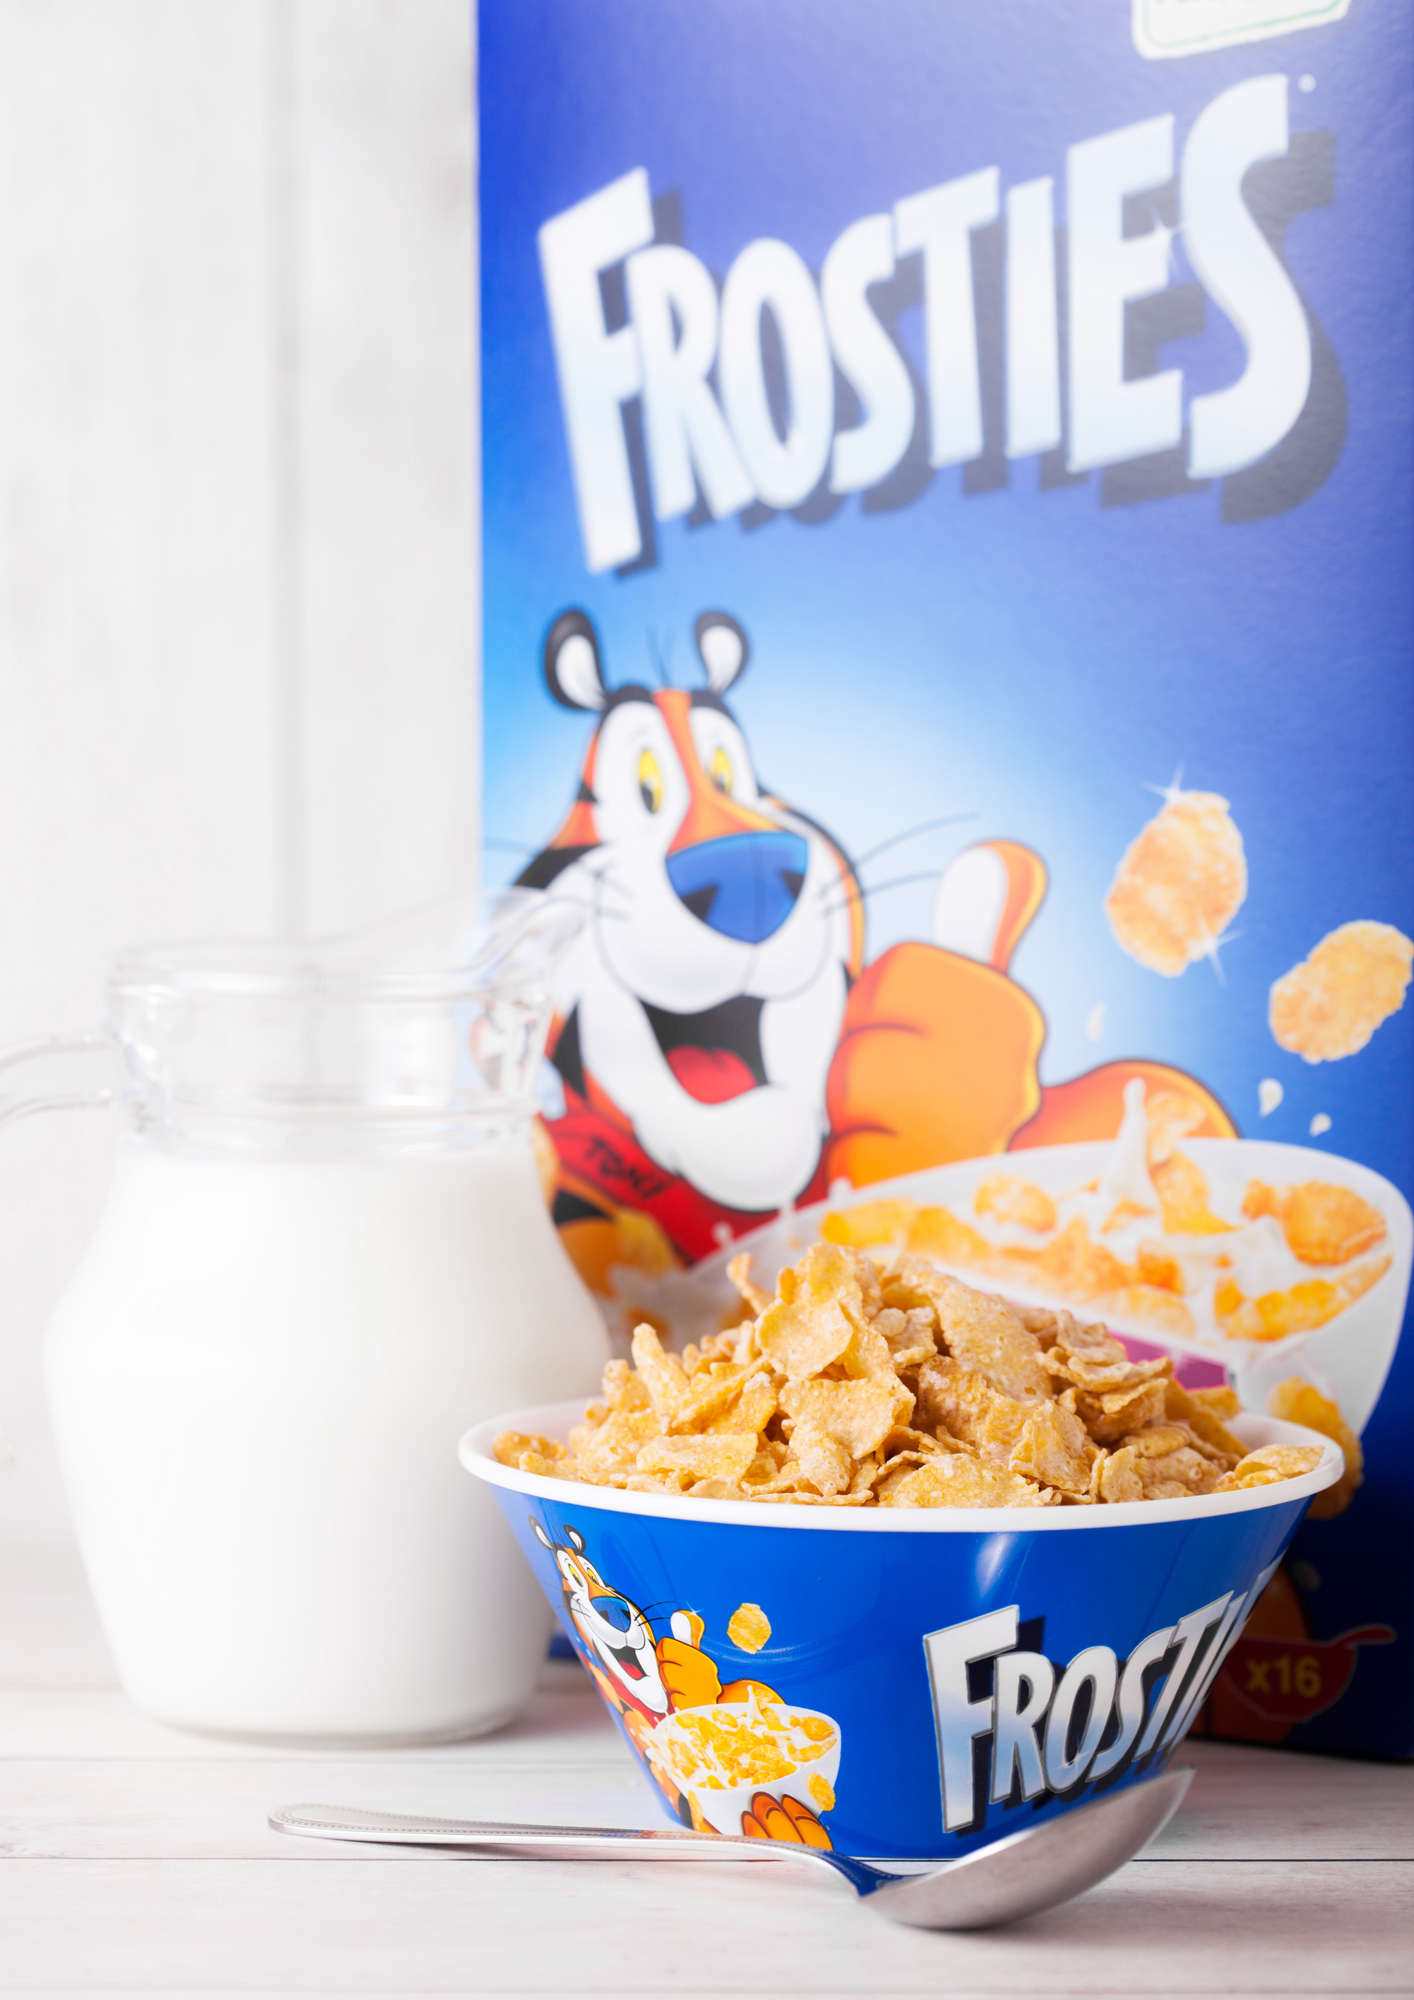 Are Frosted Flakes Gluten Free? Plus 3 Brands That Are!